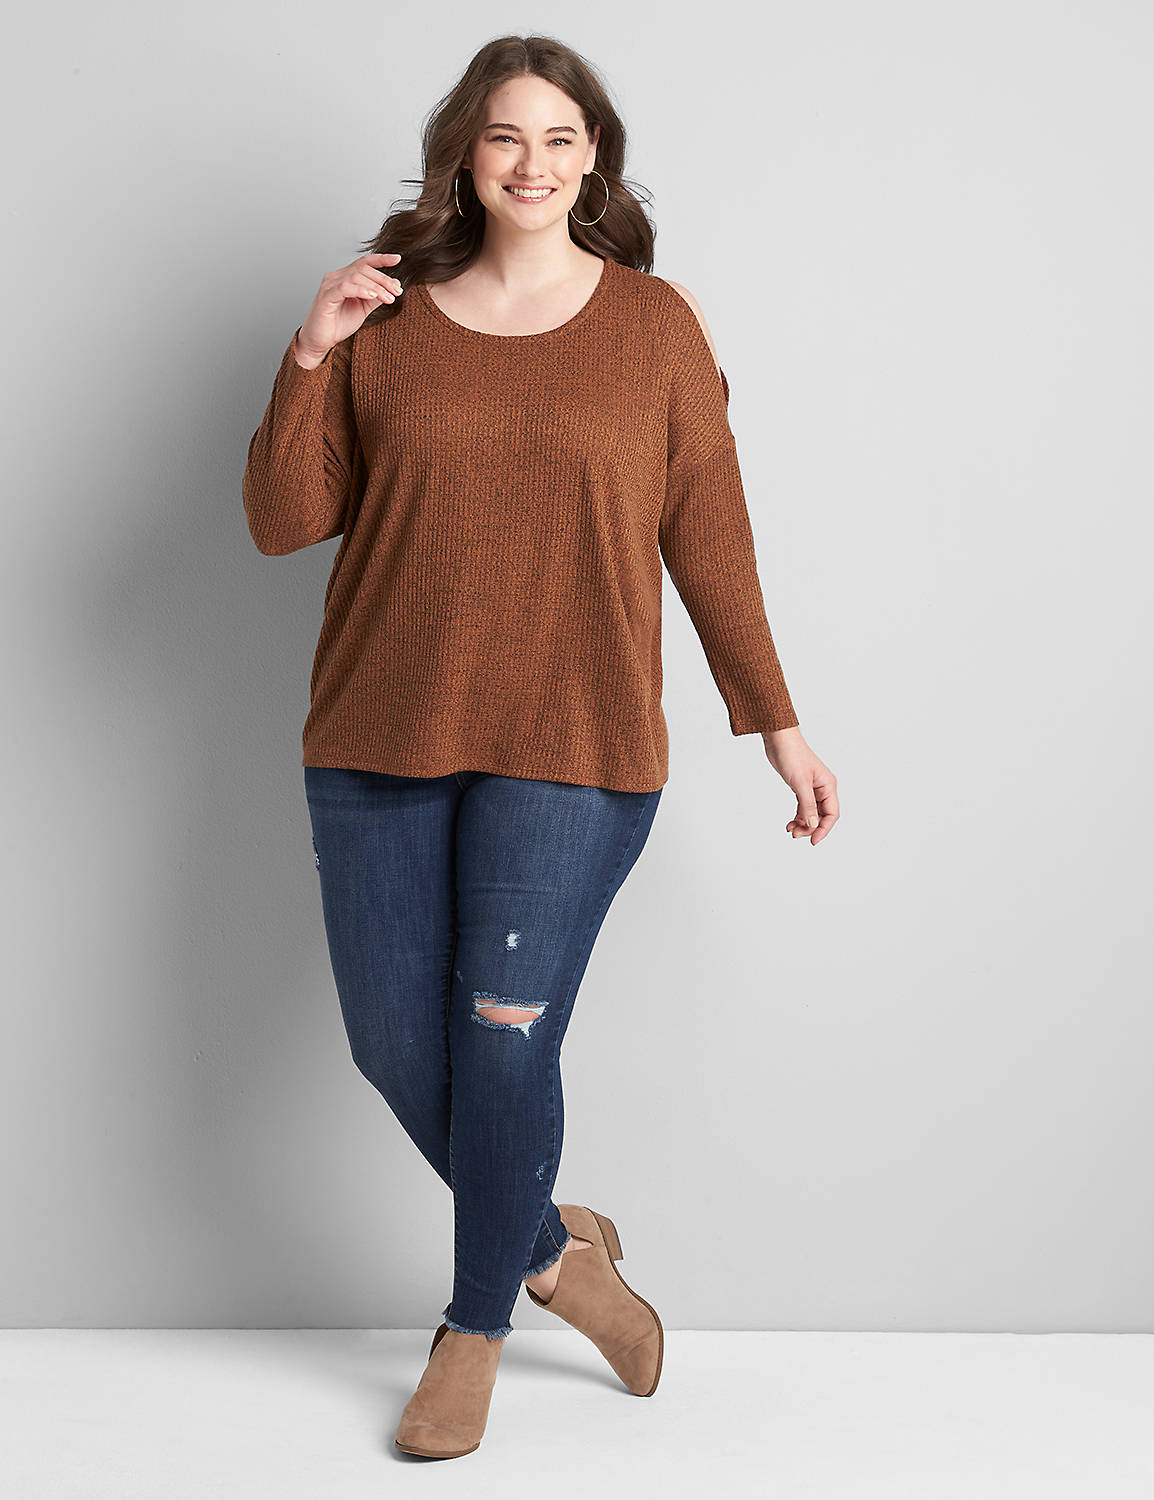 Long Sleeve Open Crew Neck With Cutout Shoulders In Brushed Waffle 1121911:PANTONE Argan Oil:14/16 Product Image 3